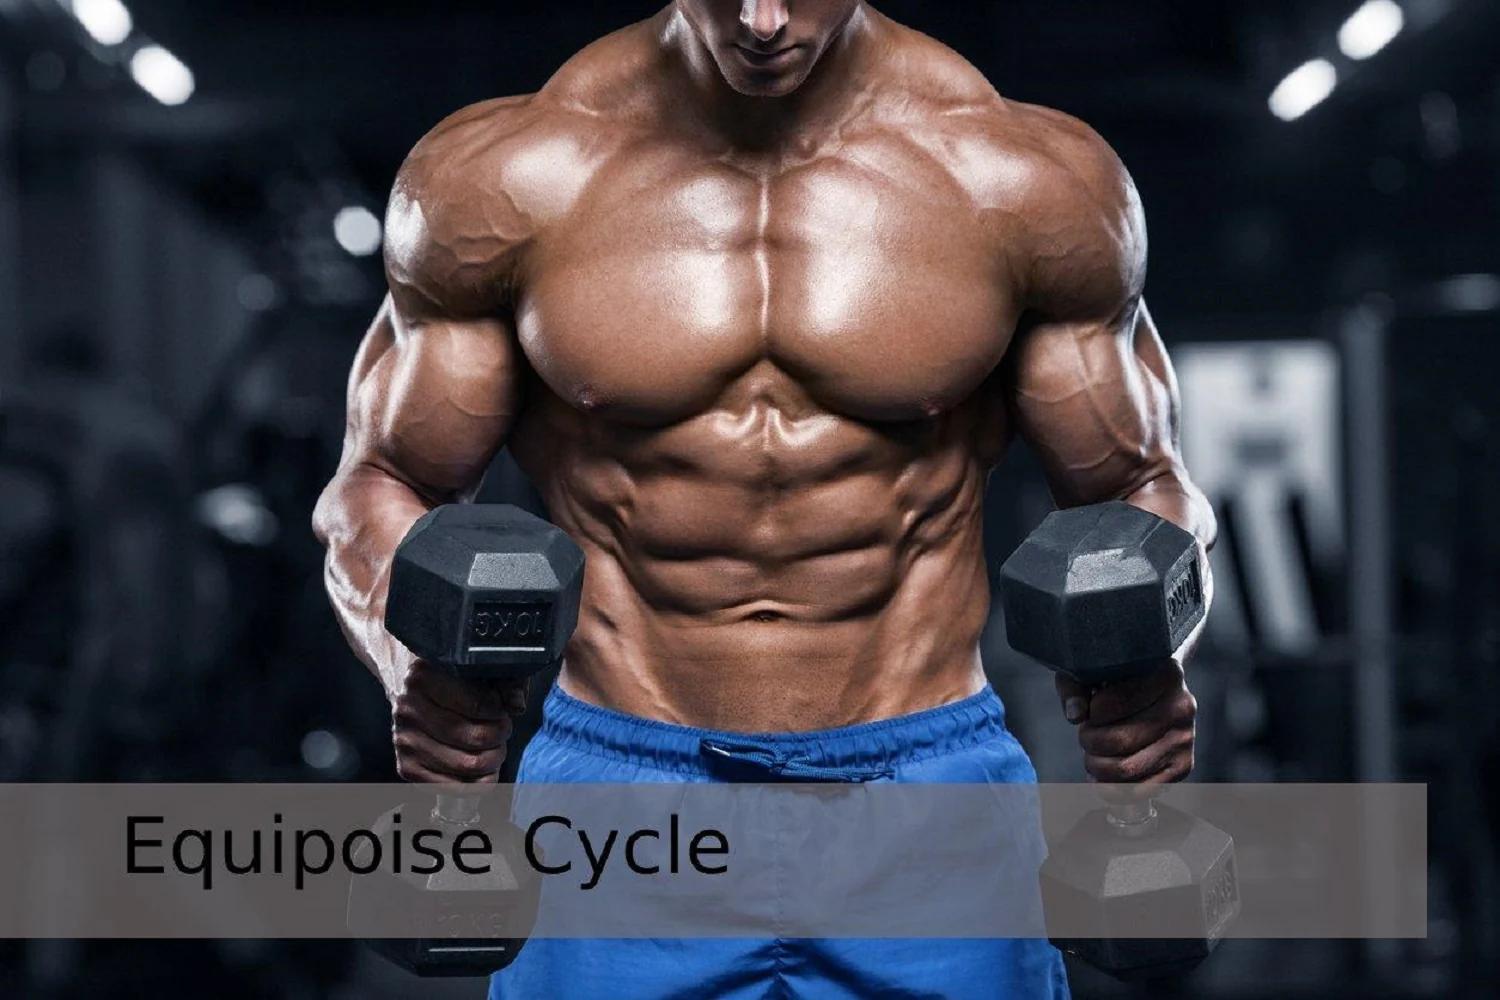 The Best Equipoise Cycle for Athletes